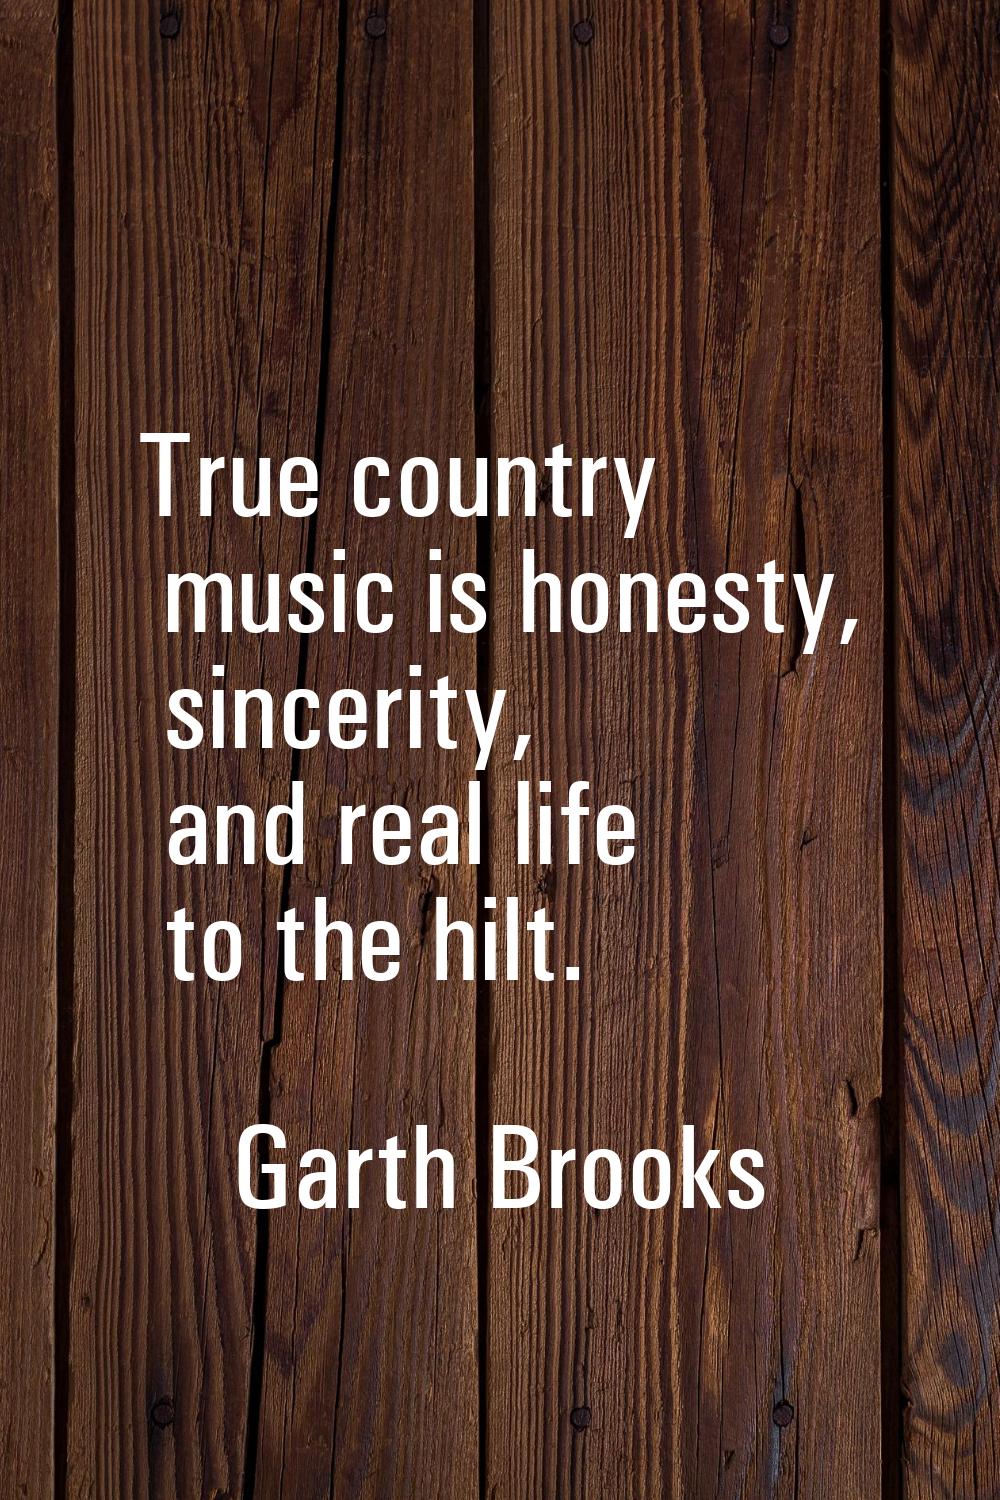 True country music is honesty, sincerity, and real life to the hilt.